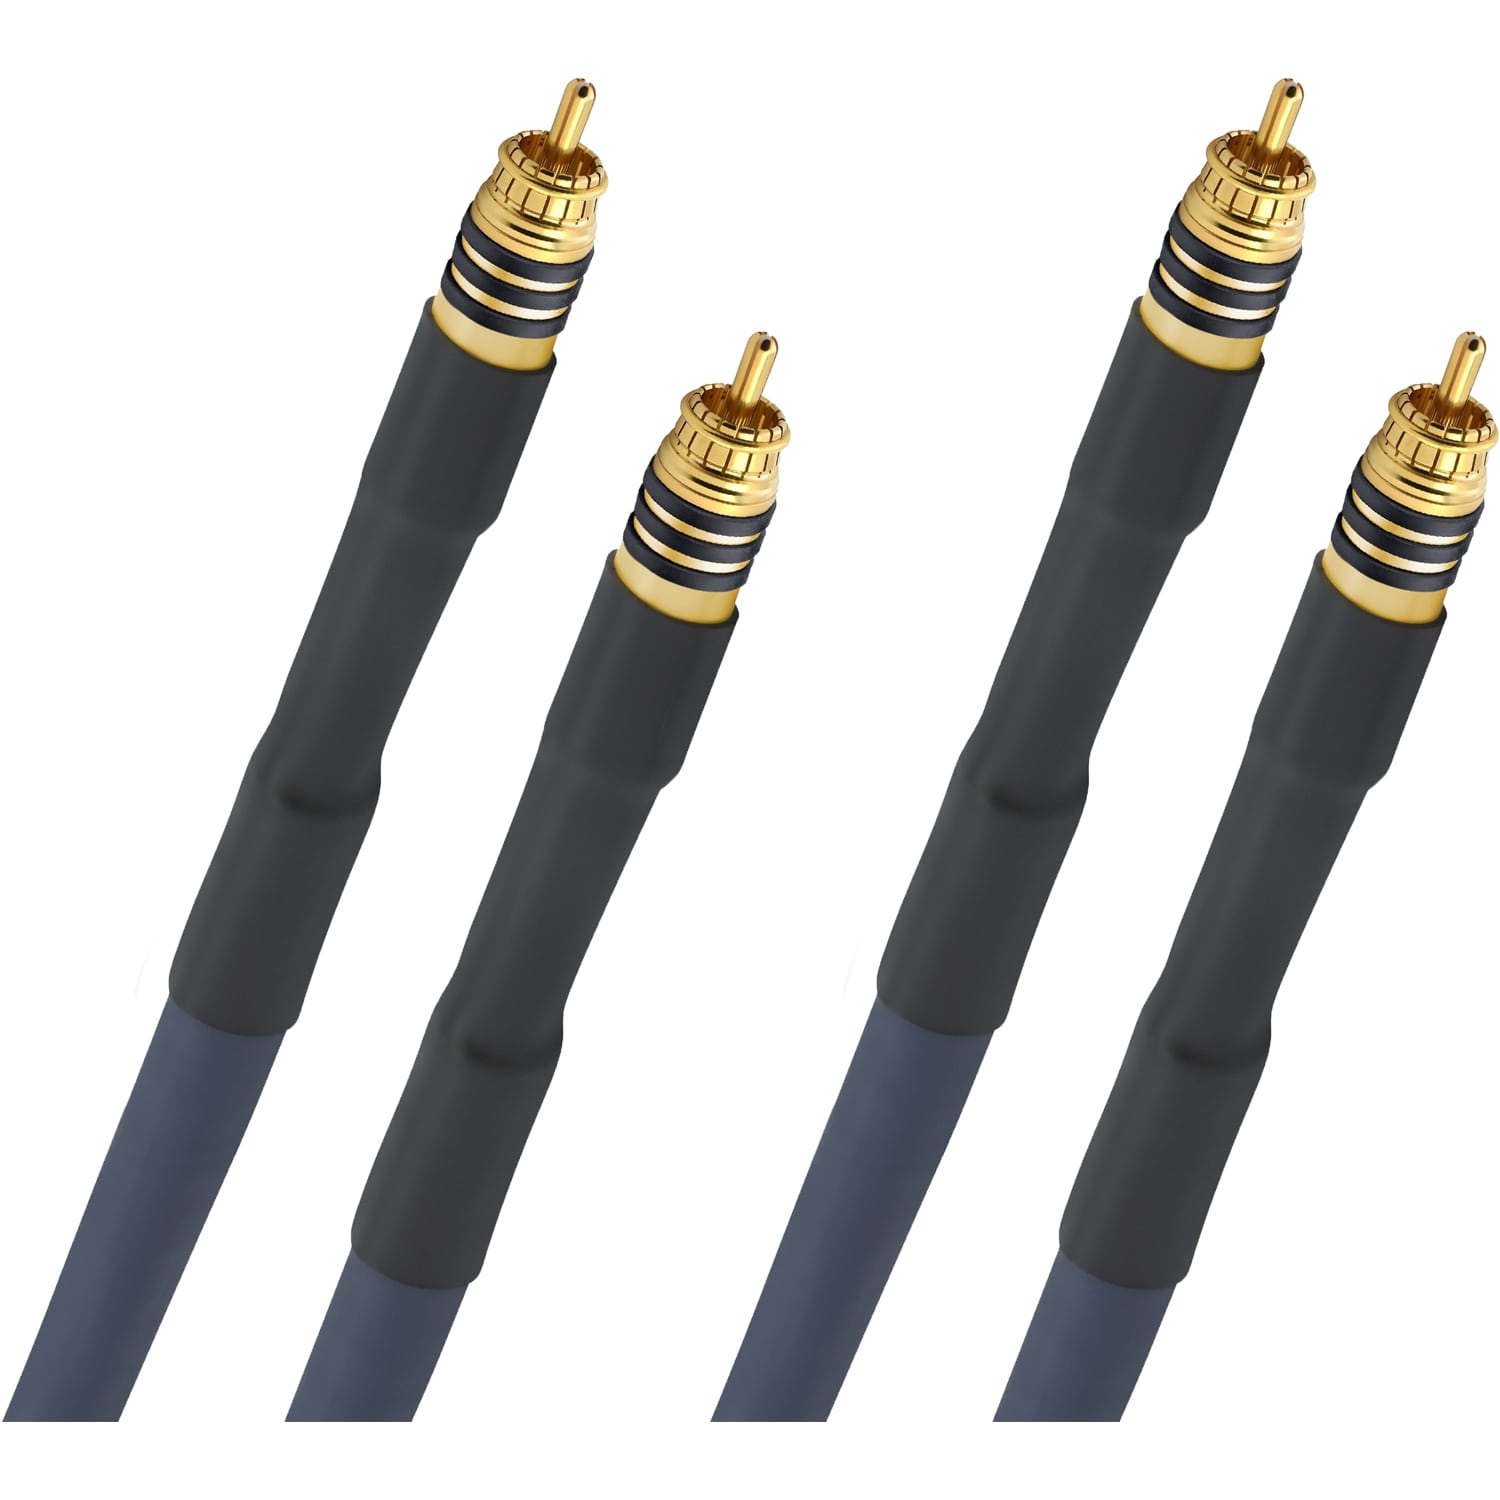 Кабели межблочные аудио Oehlbach STATE OF THE ART XXL Cable RCA, 2x1,50m, gold, D1C13114 силовые кабели oehlbach state of the art xxl powercord 3m d1c13062